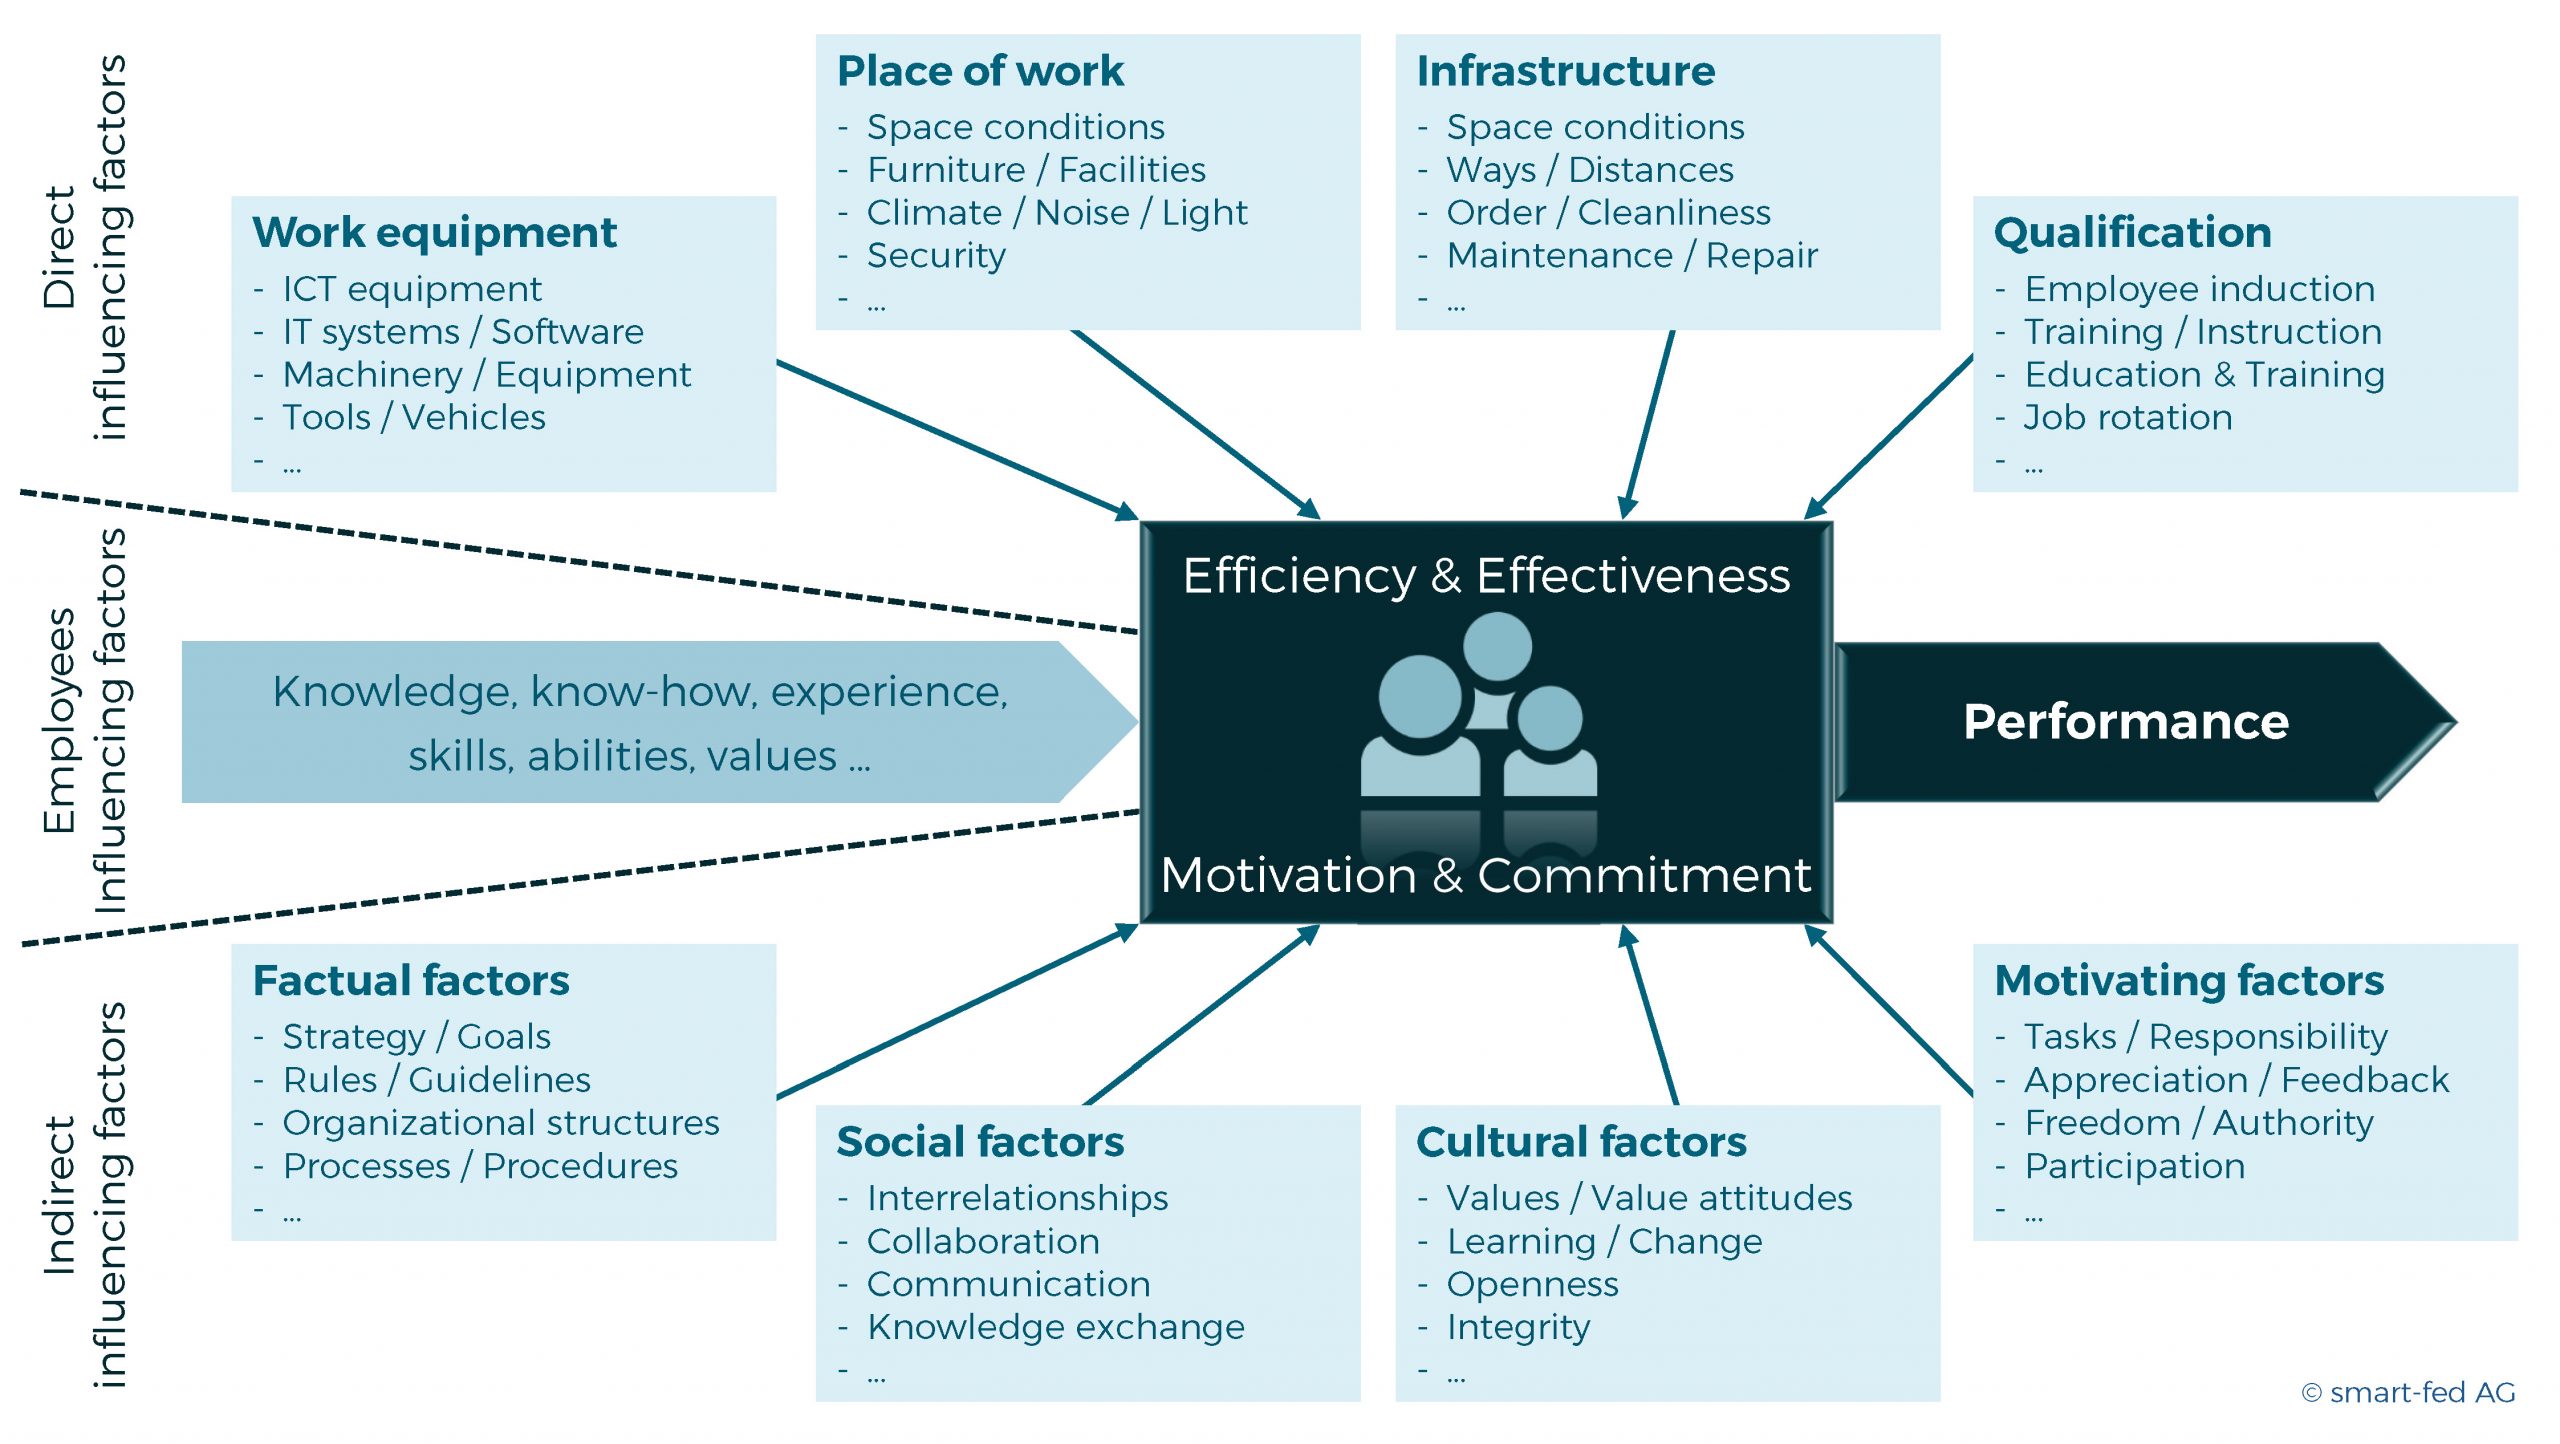 Increasing employee performance, efficiency and effectiviness